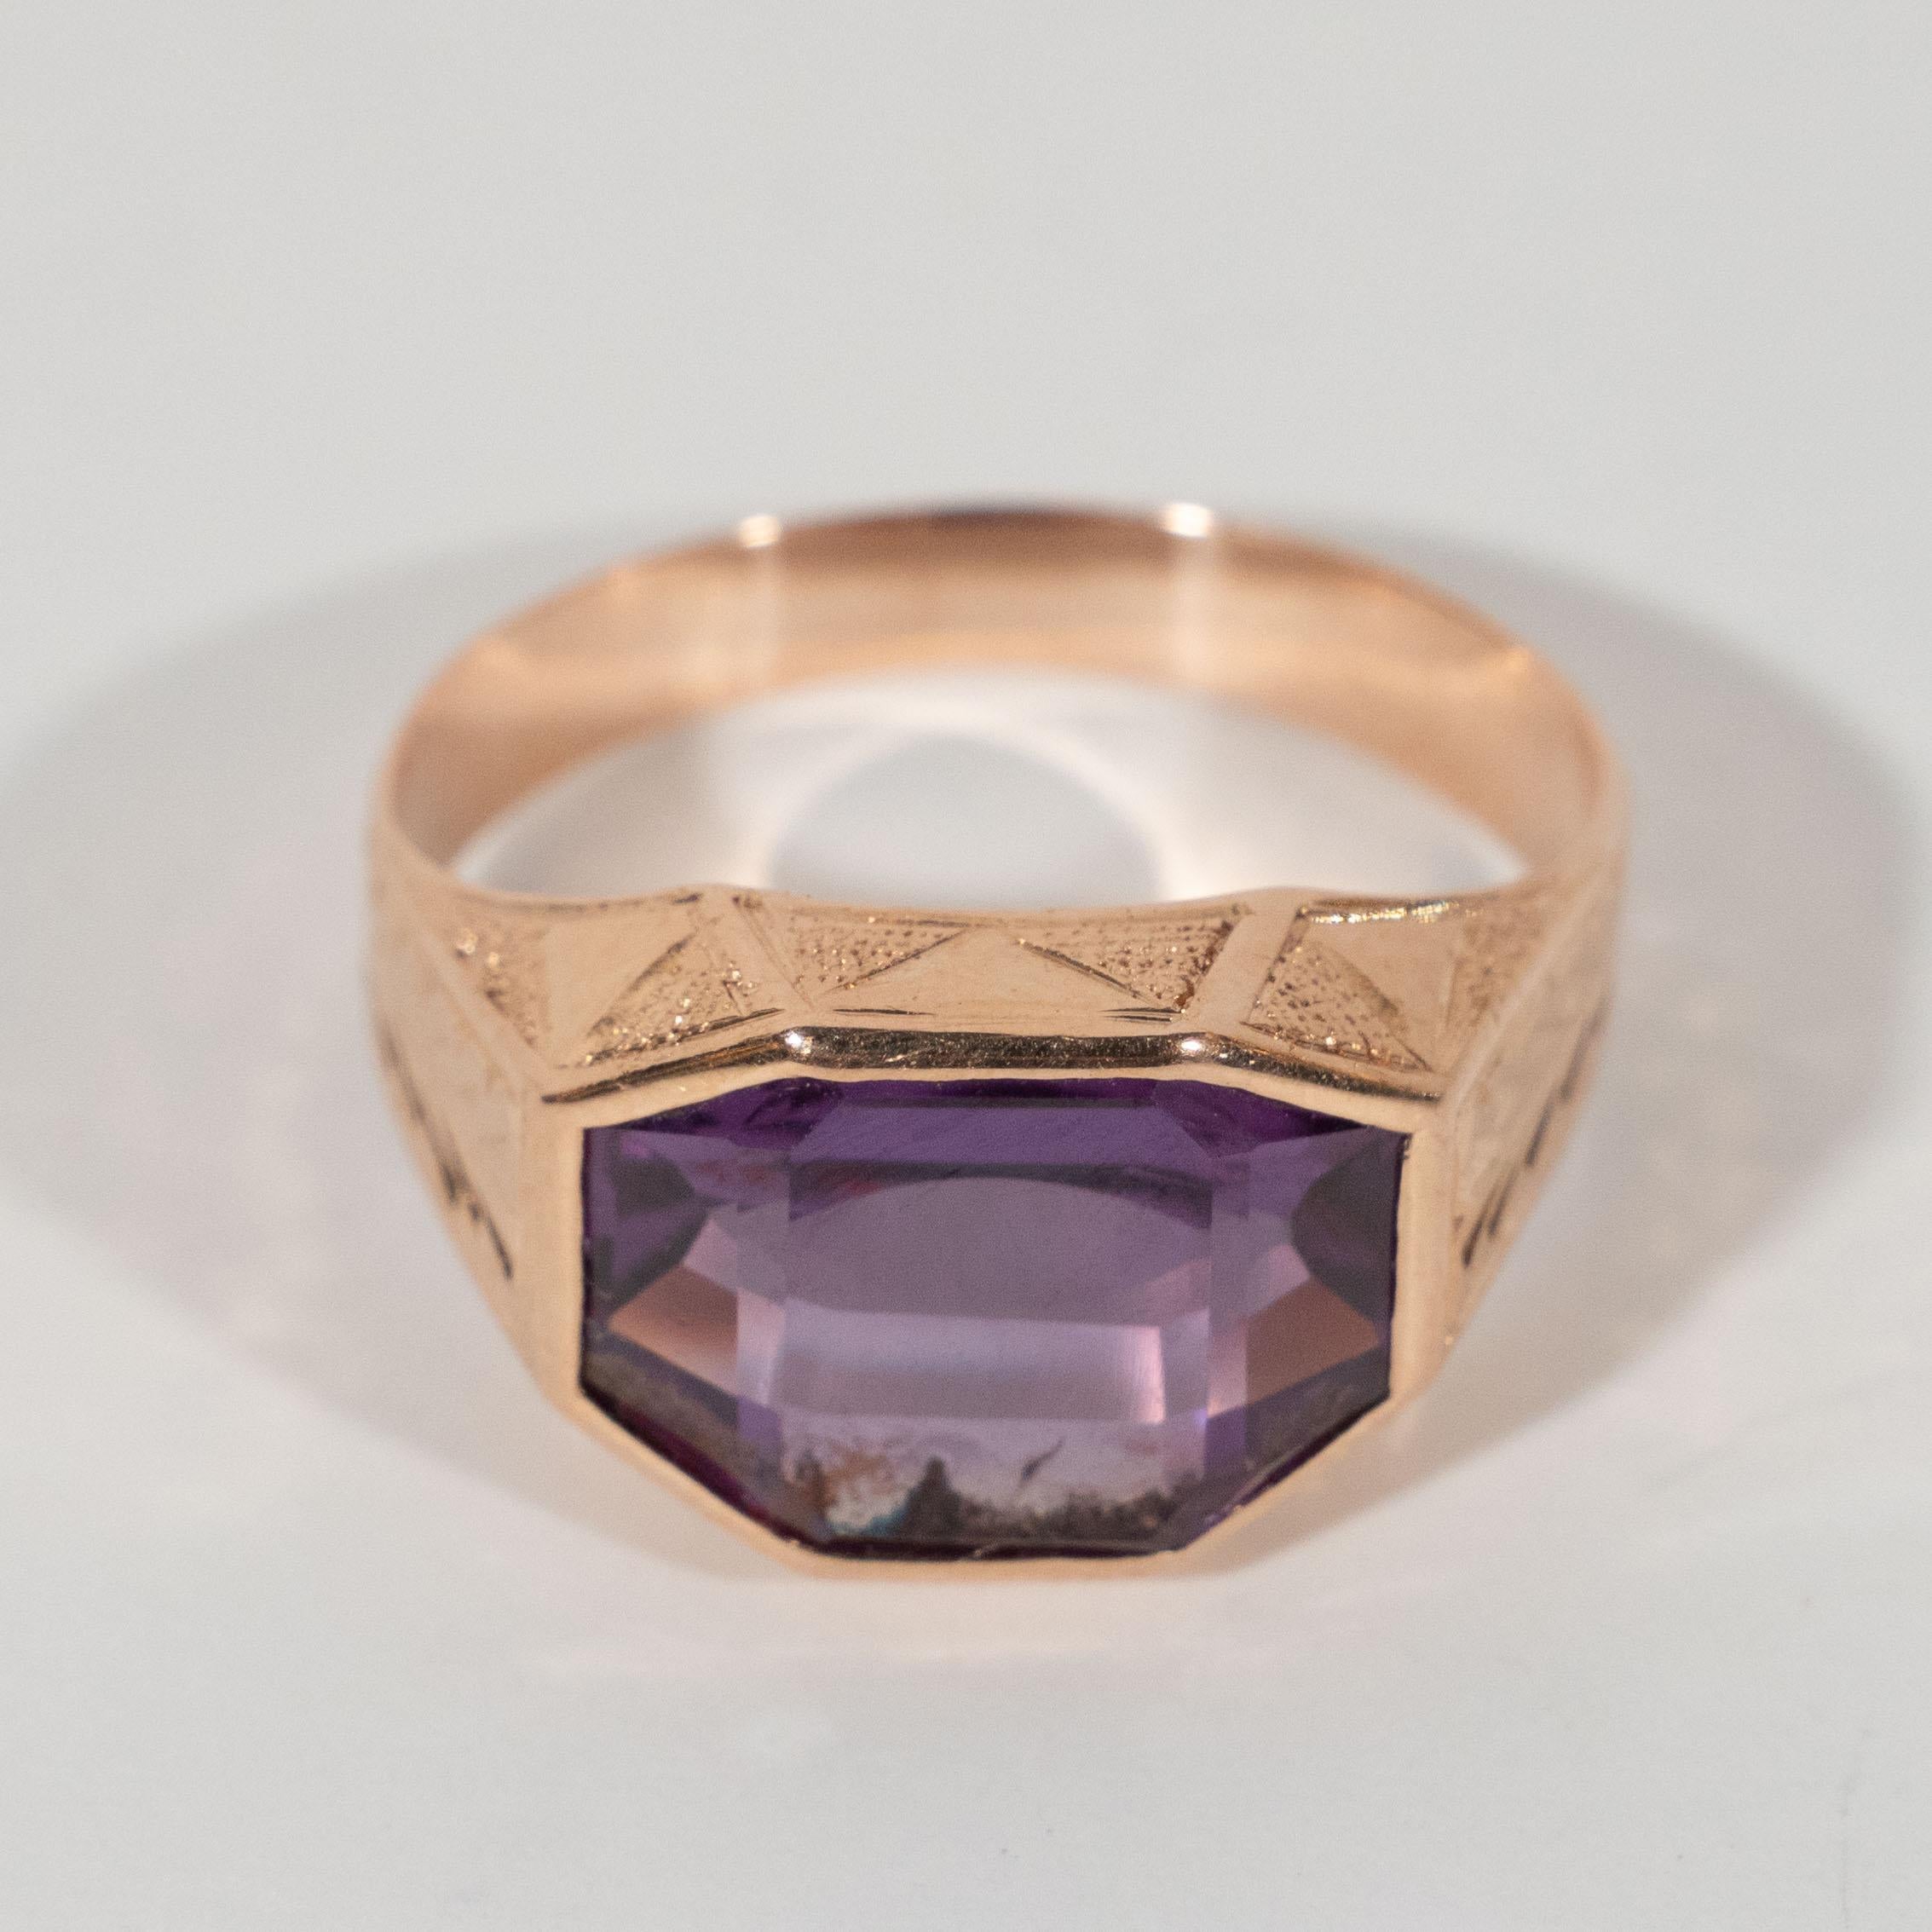 This stunning and glamorous Art Deco 14kt rose gold and amethyst ring was hand crafted in the United States circa 1925. It features an octagonal cut amethyst set in 14kt rose gold with stylized foliate detailing on the shoulders and geometric